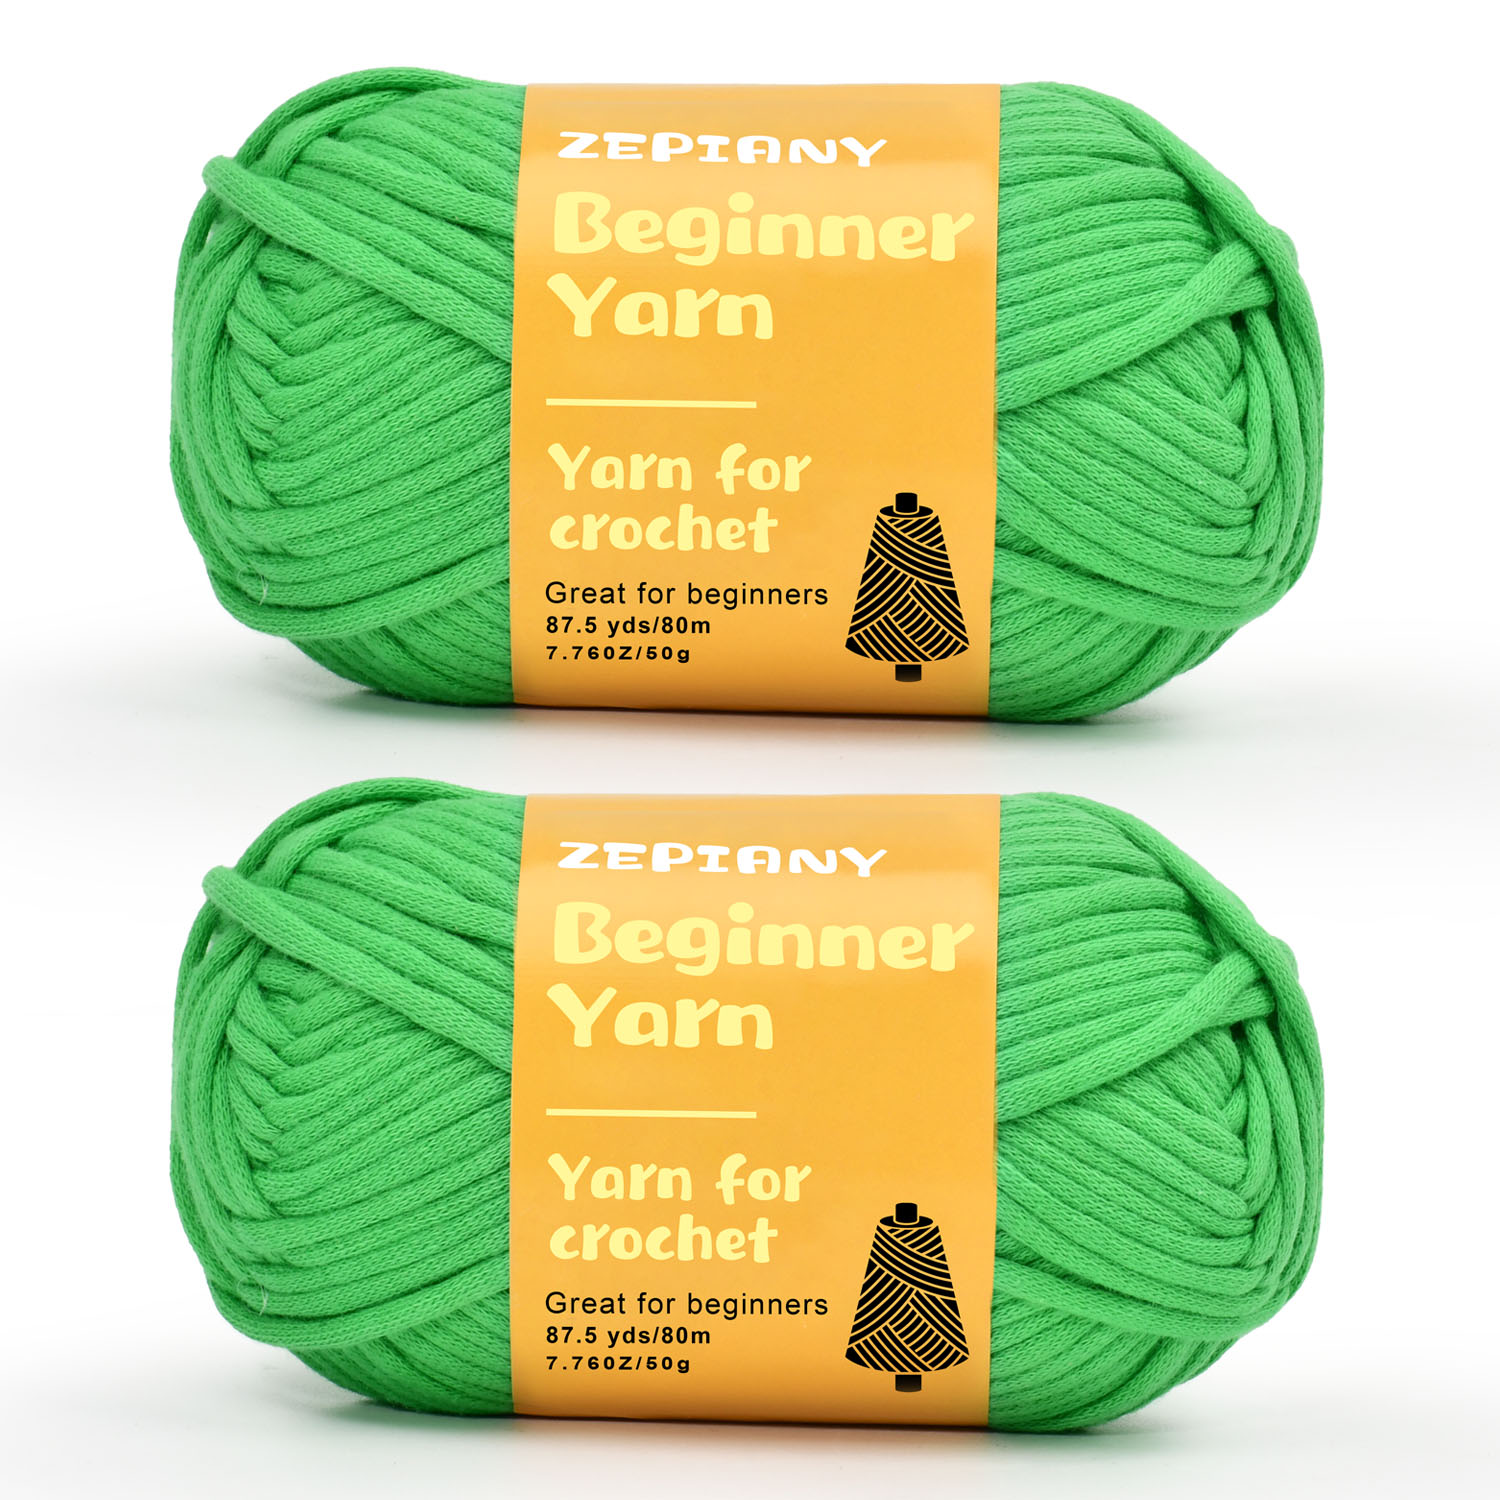 200g Beginners Easy Yarn for Crocheting, 273 Yards Grass Green Crochet Yarn  with Easy-to-See Stitches, Chunky Thick Cotton-Nylon Blend, Pefect for